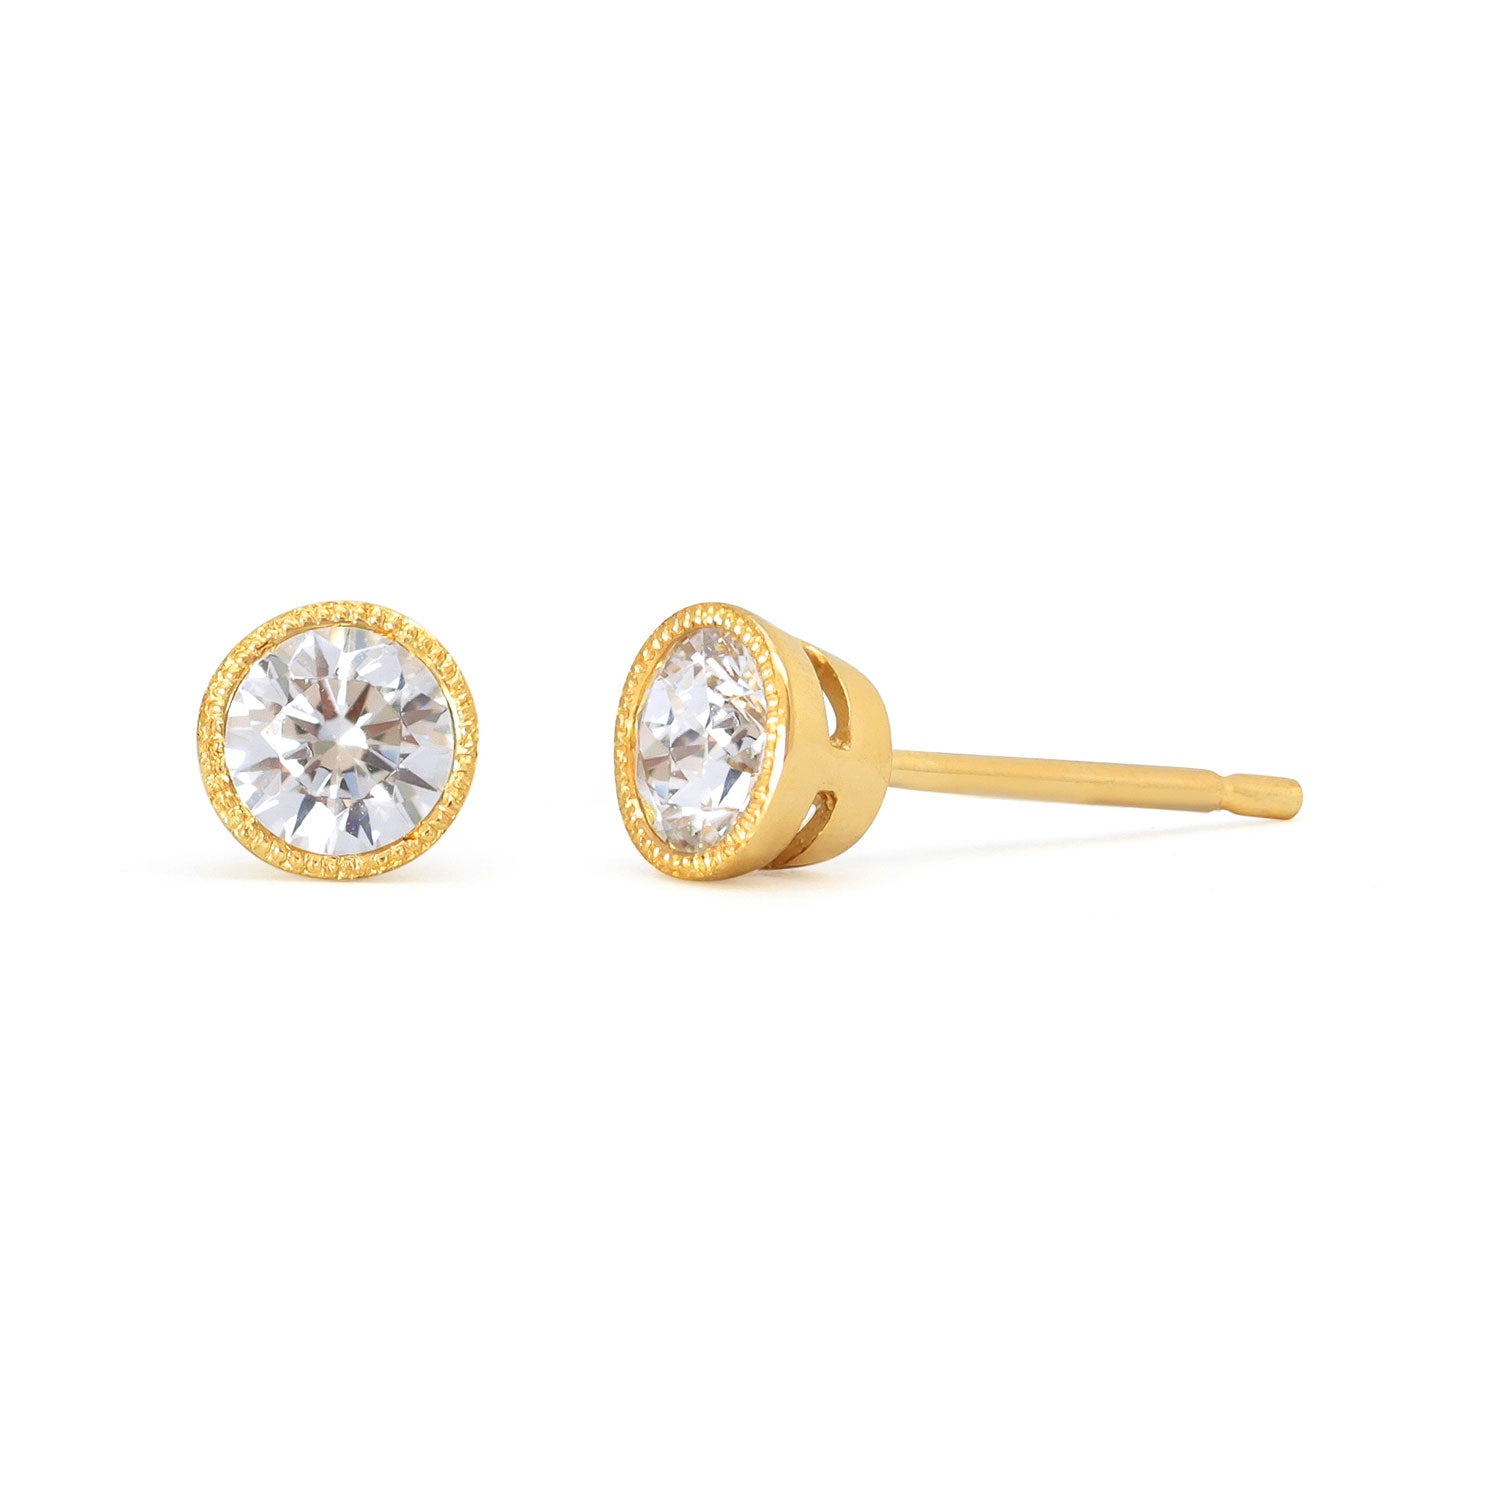 Perfectus Artisanal Gold and Recycled Diamond Rub-over Stud Earrings